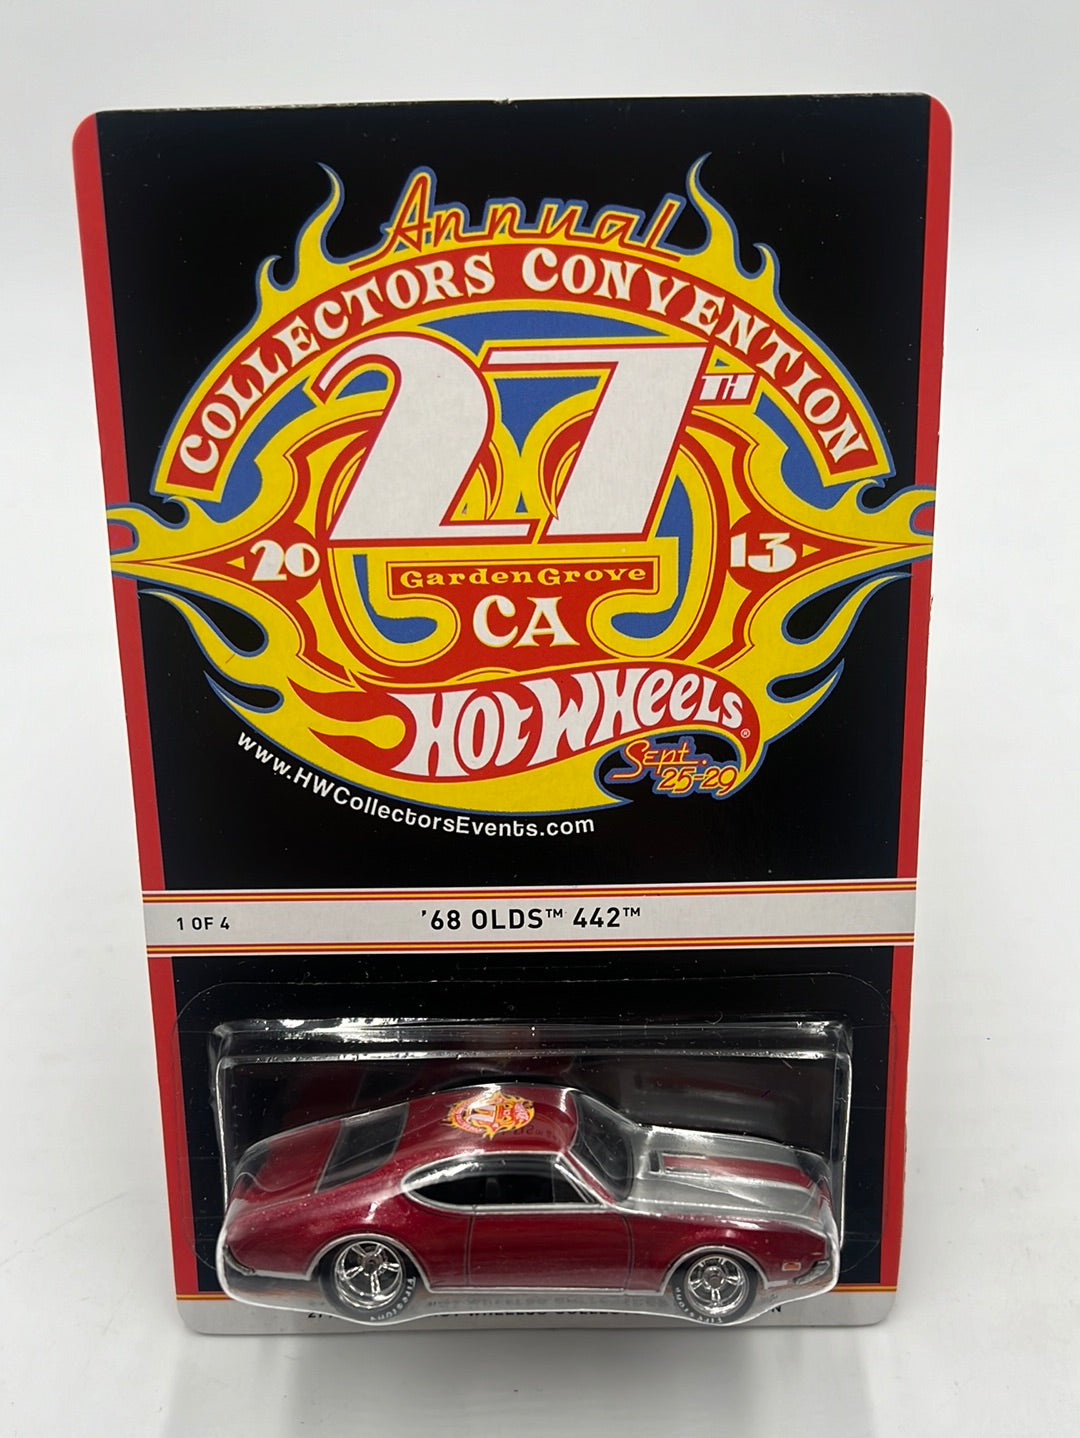 2013 Hot Wheels 27th Annual Collectors Convention ‘68 Olds 442 Low Number 189/1100